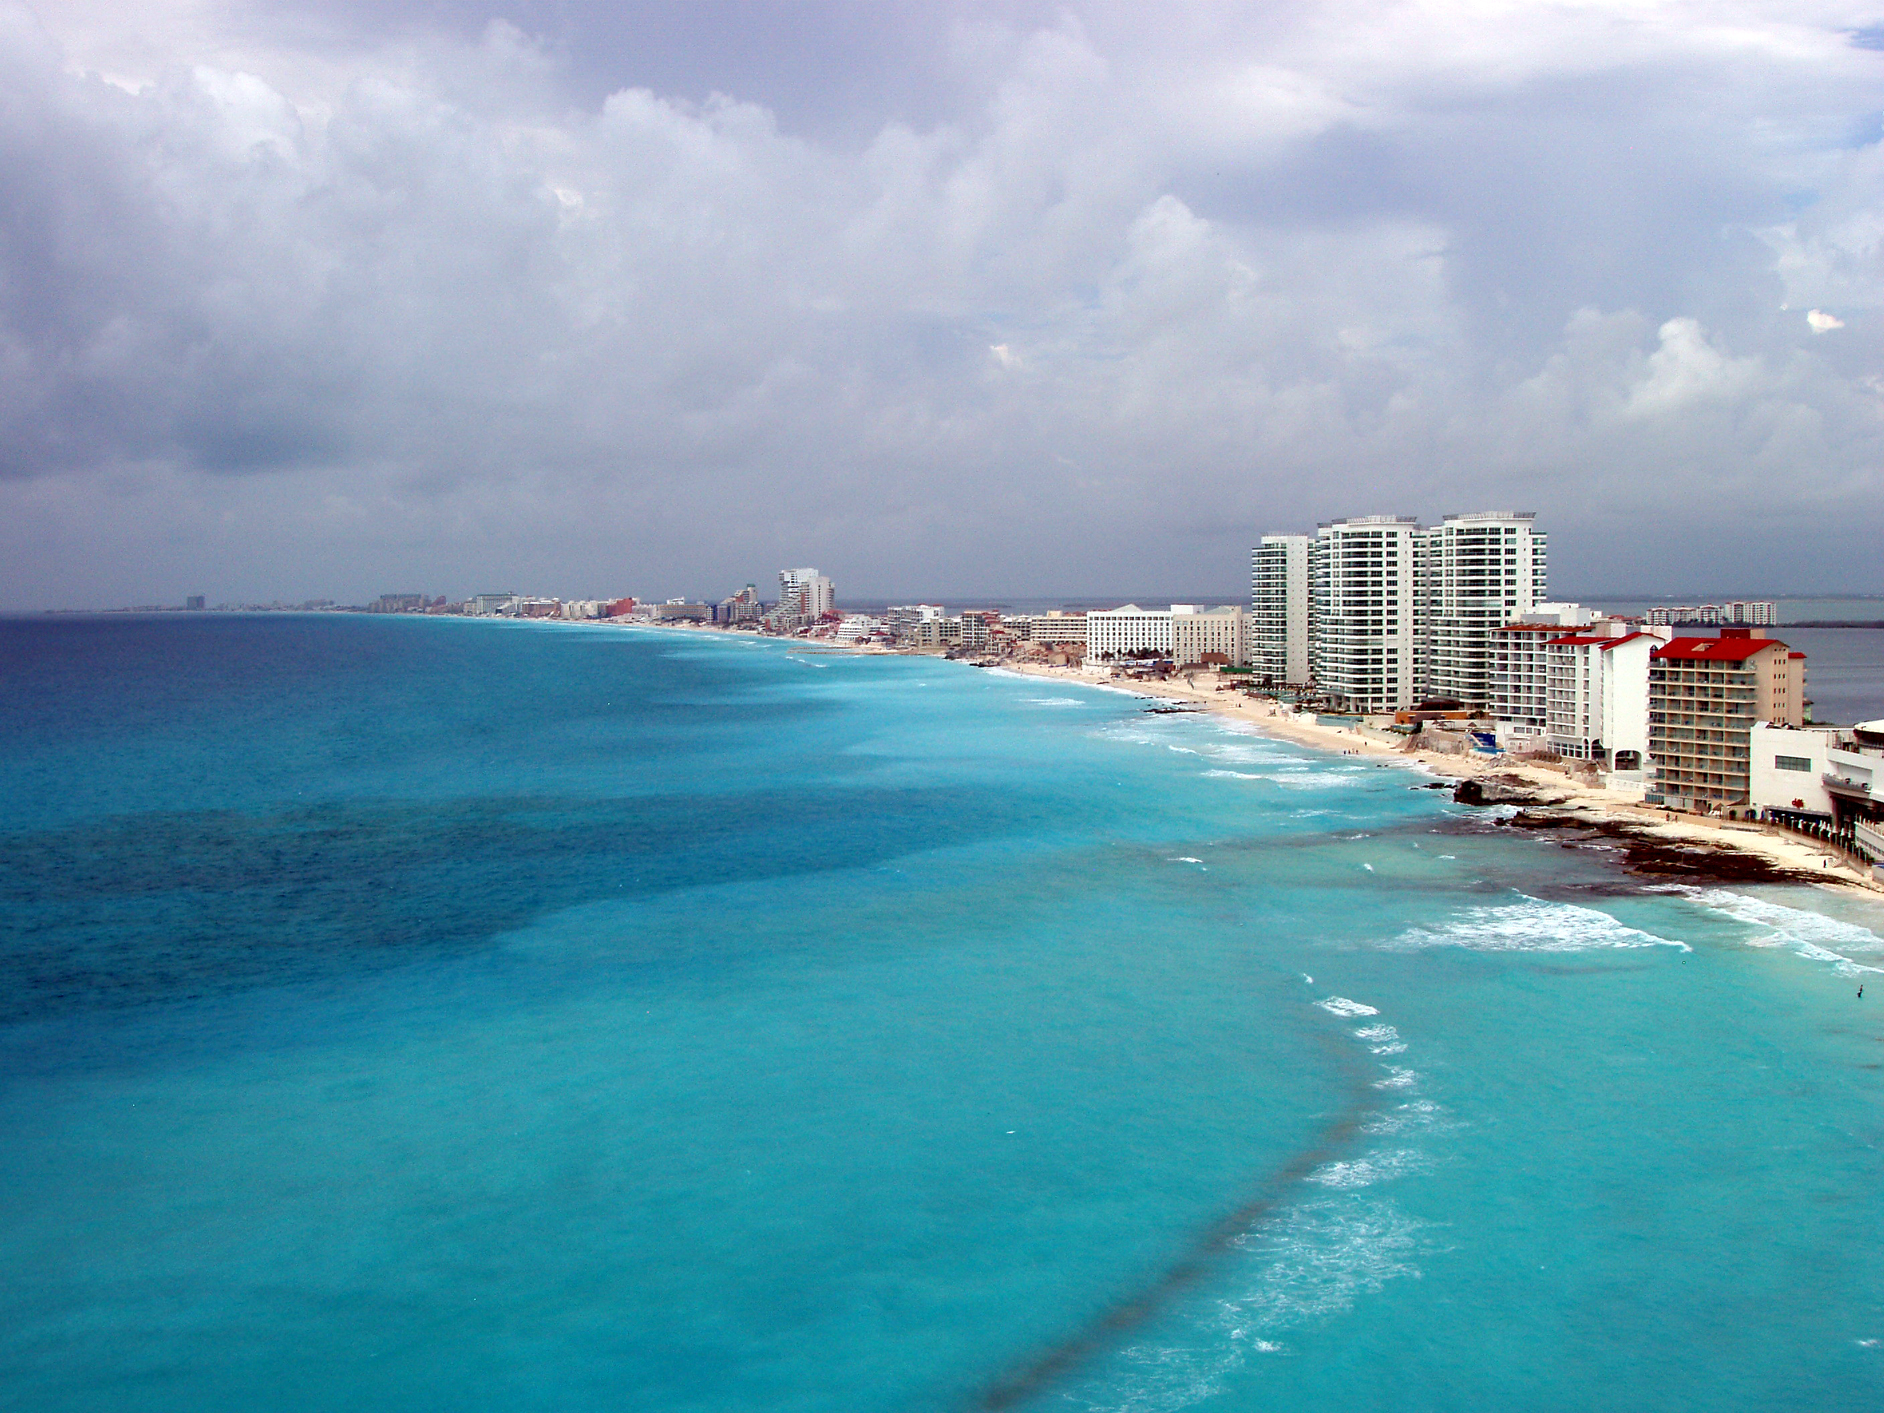 10 Best Things To Do in Cancun, Mexico [with Suggested Tours]